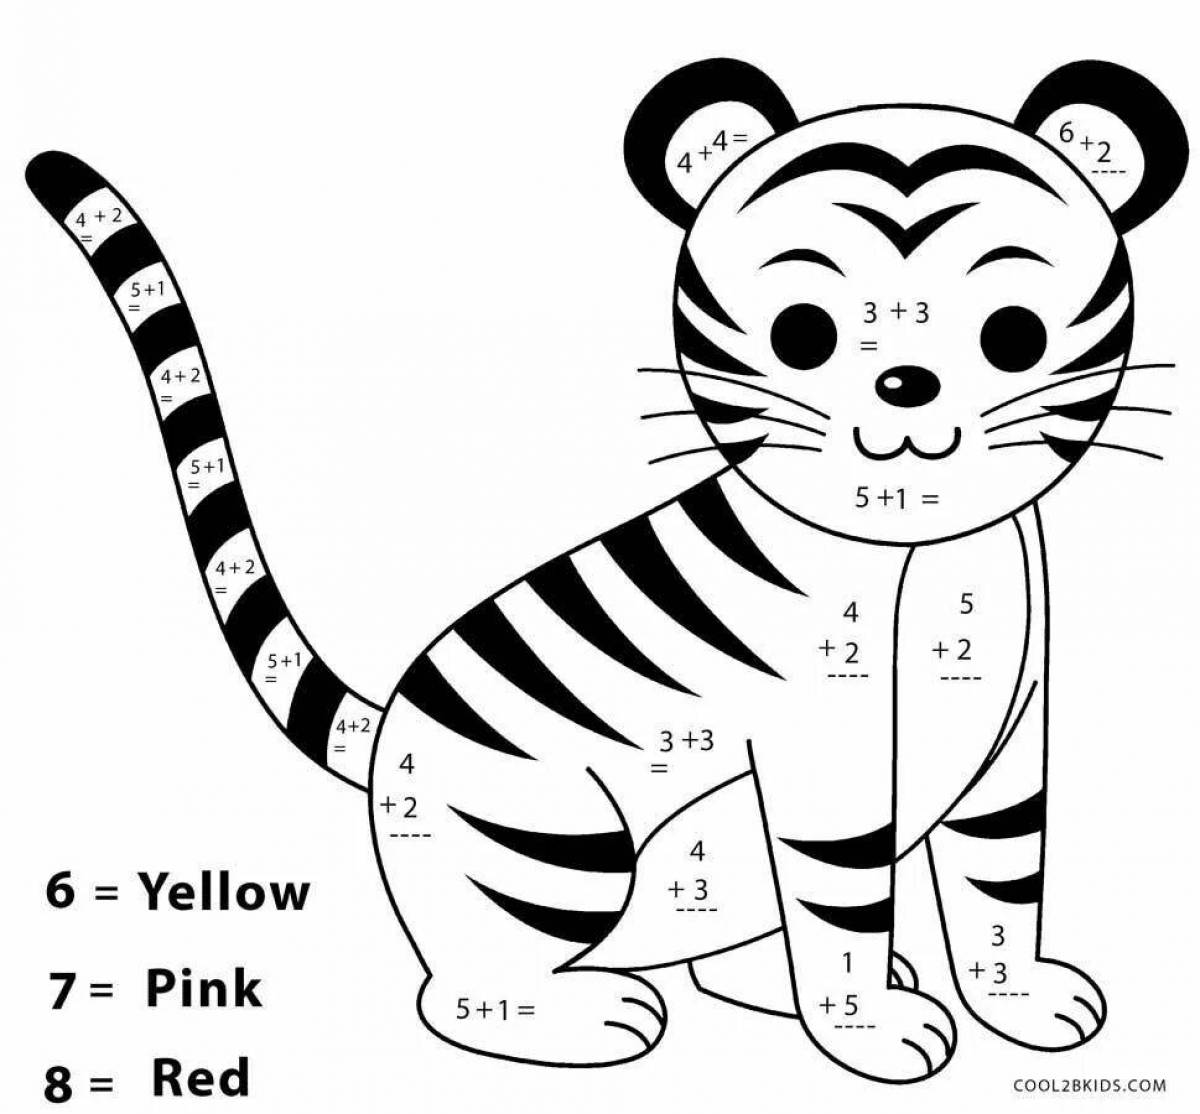 Coloring book magic tiger for children 3-4 years old